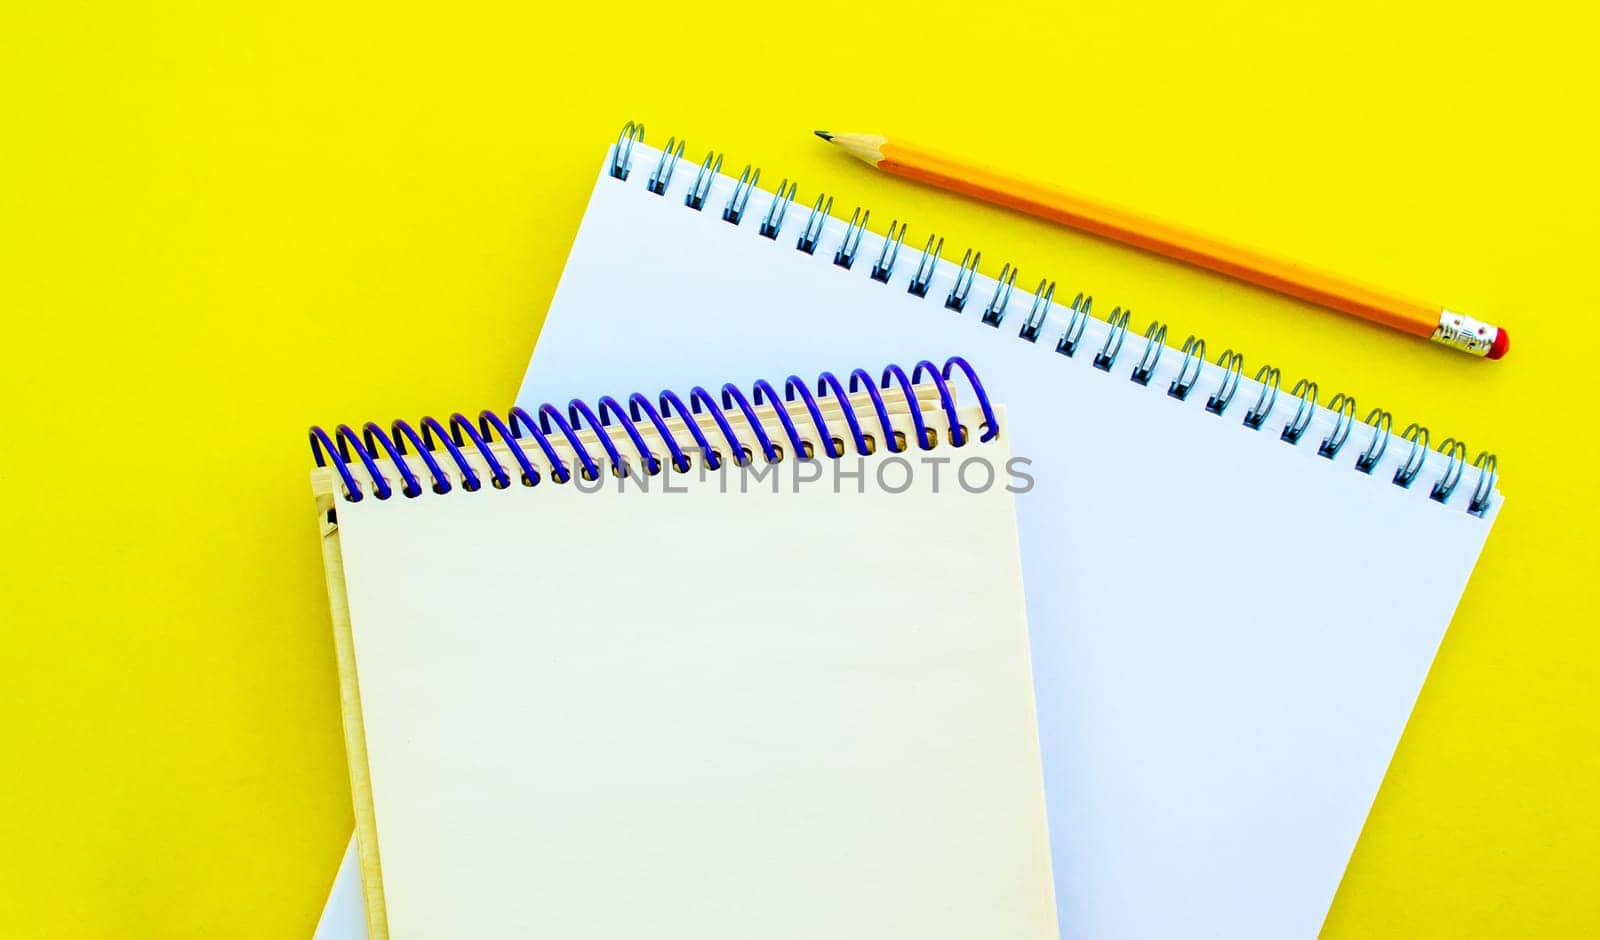 White and beige notepads and a pencil on a yellow background. School white and beige notebooks and a pencil on a yellow background.